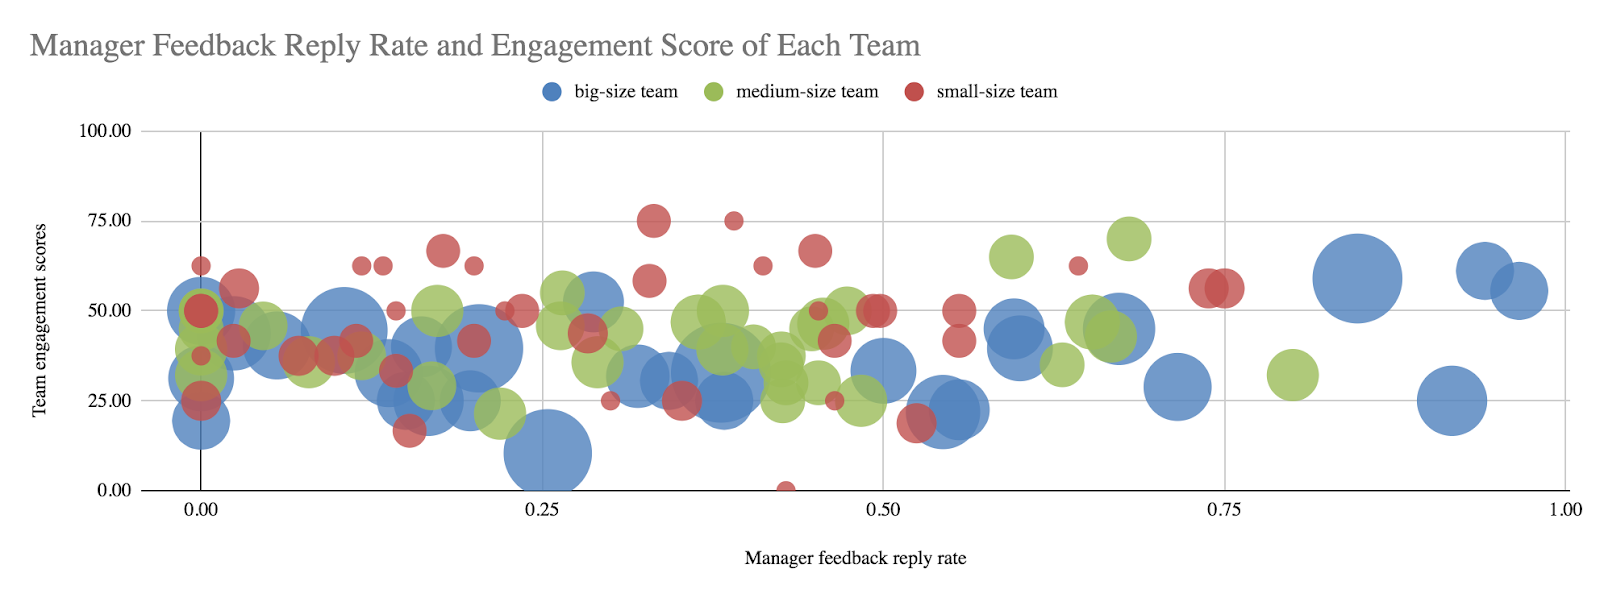 Manager Feedback Reply Rate and Engagement Score of each team